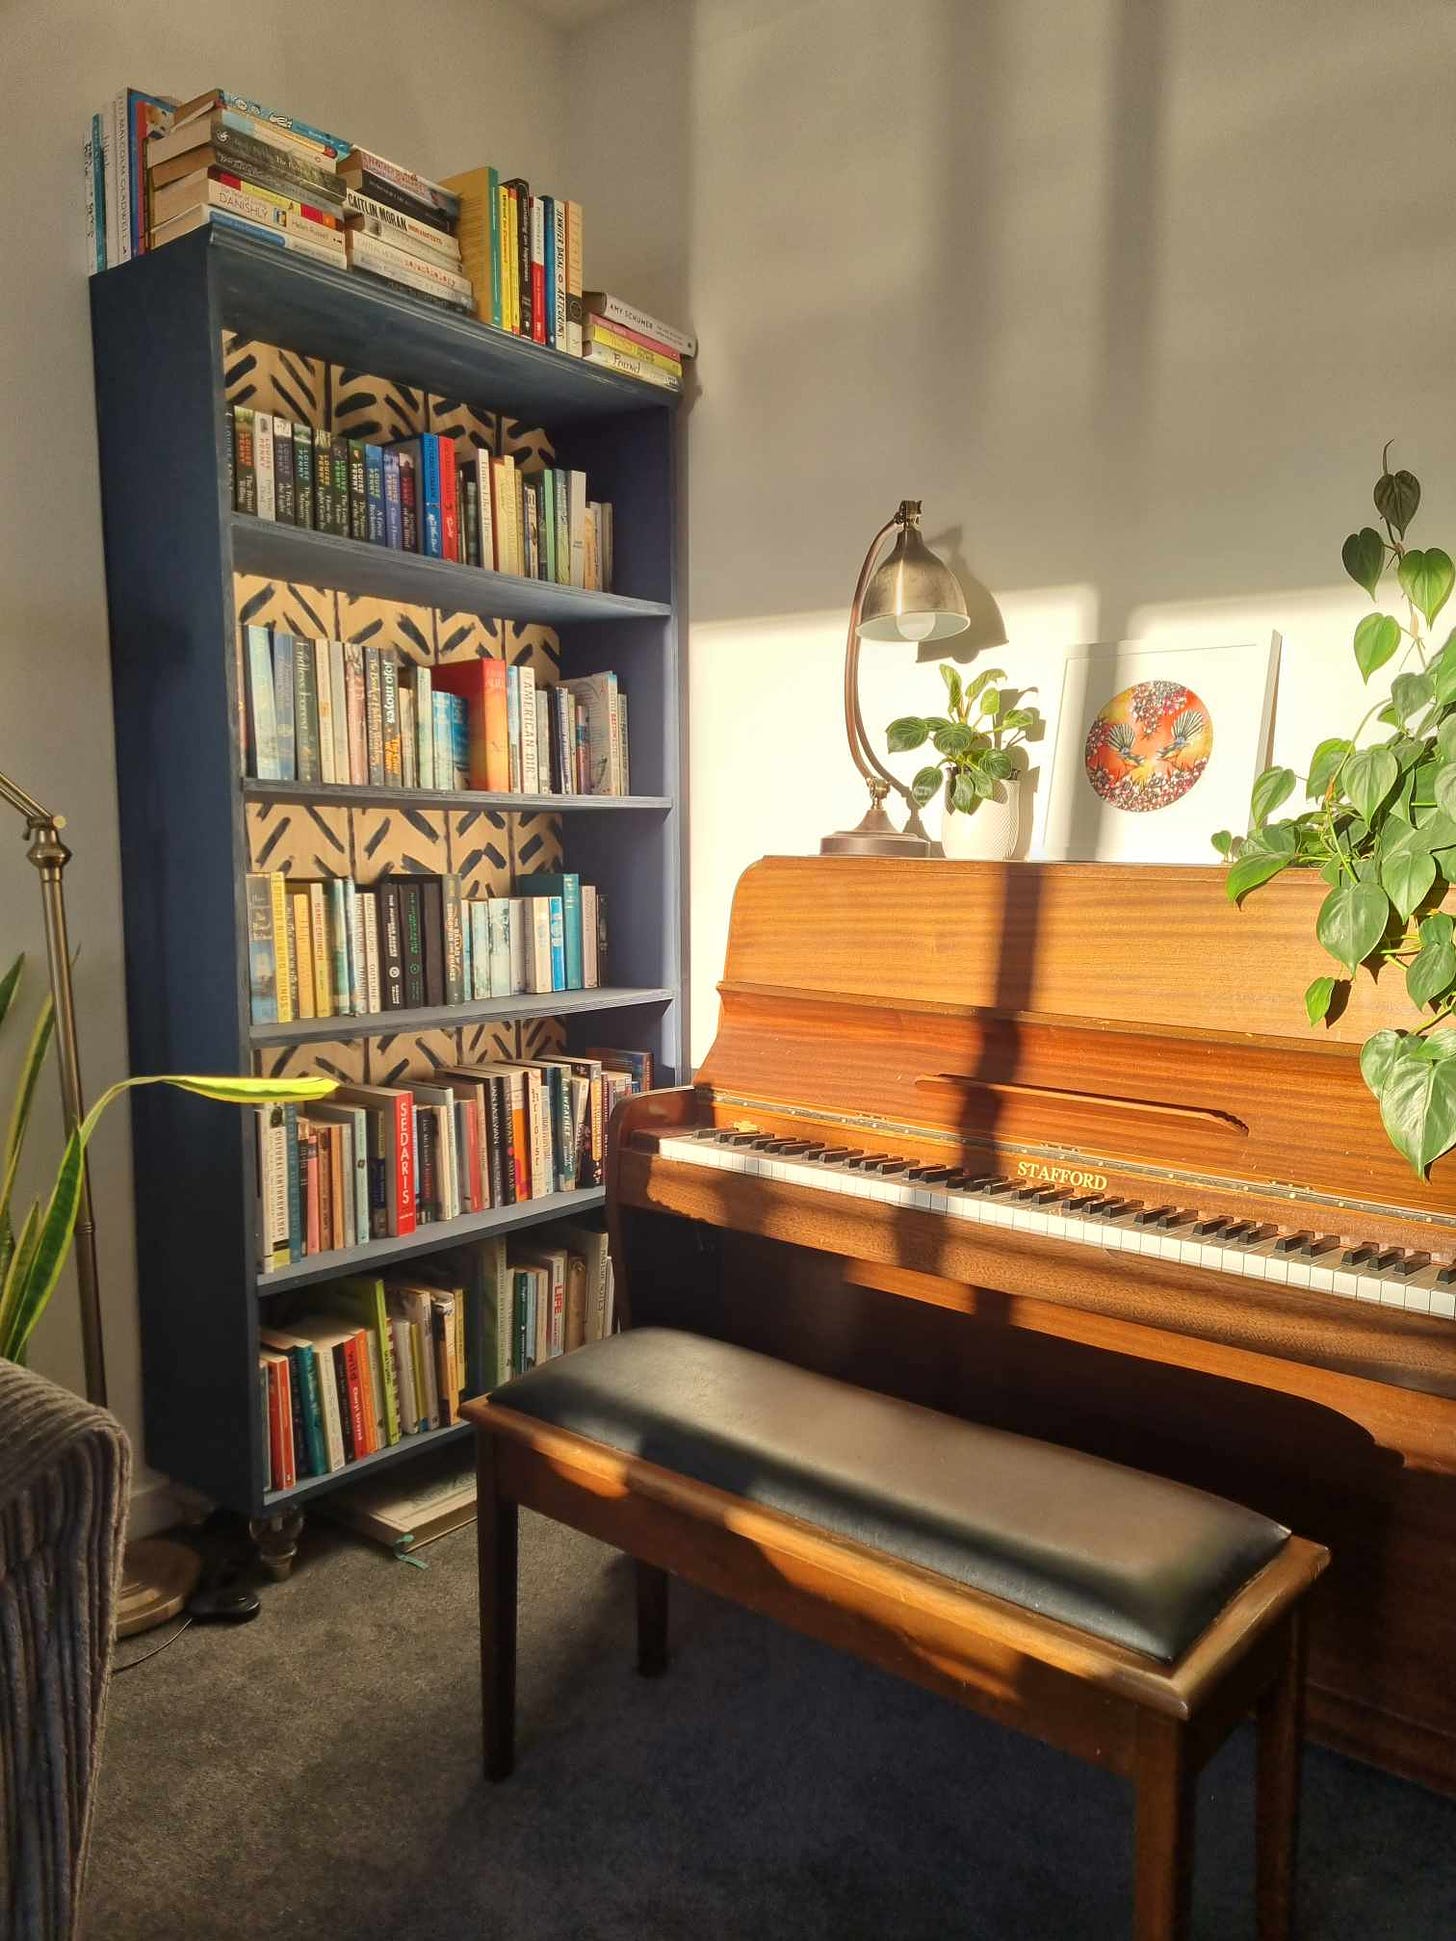 A corner of Charlotte's house with a piano, large bookshelf, and some houseplants, glowing golden in the morning sunshine.